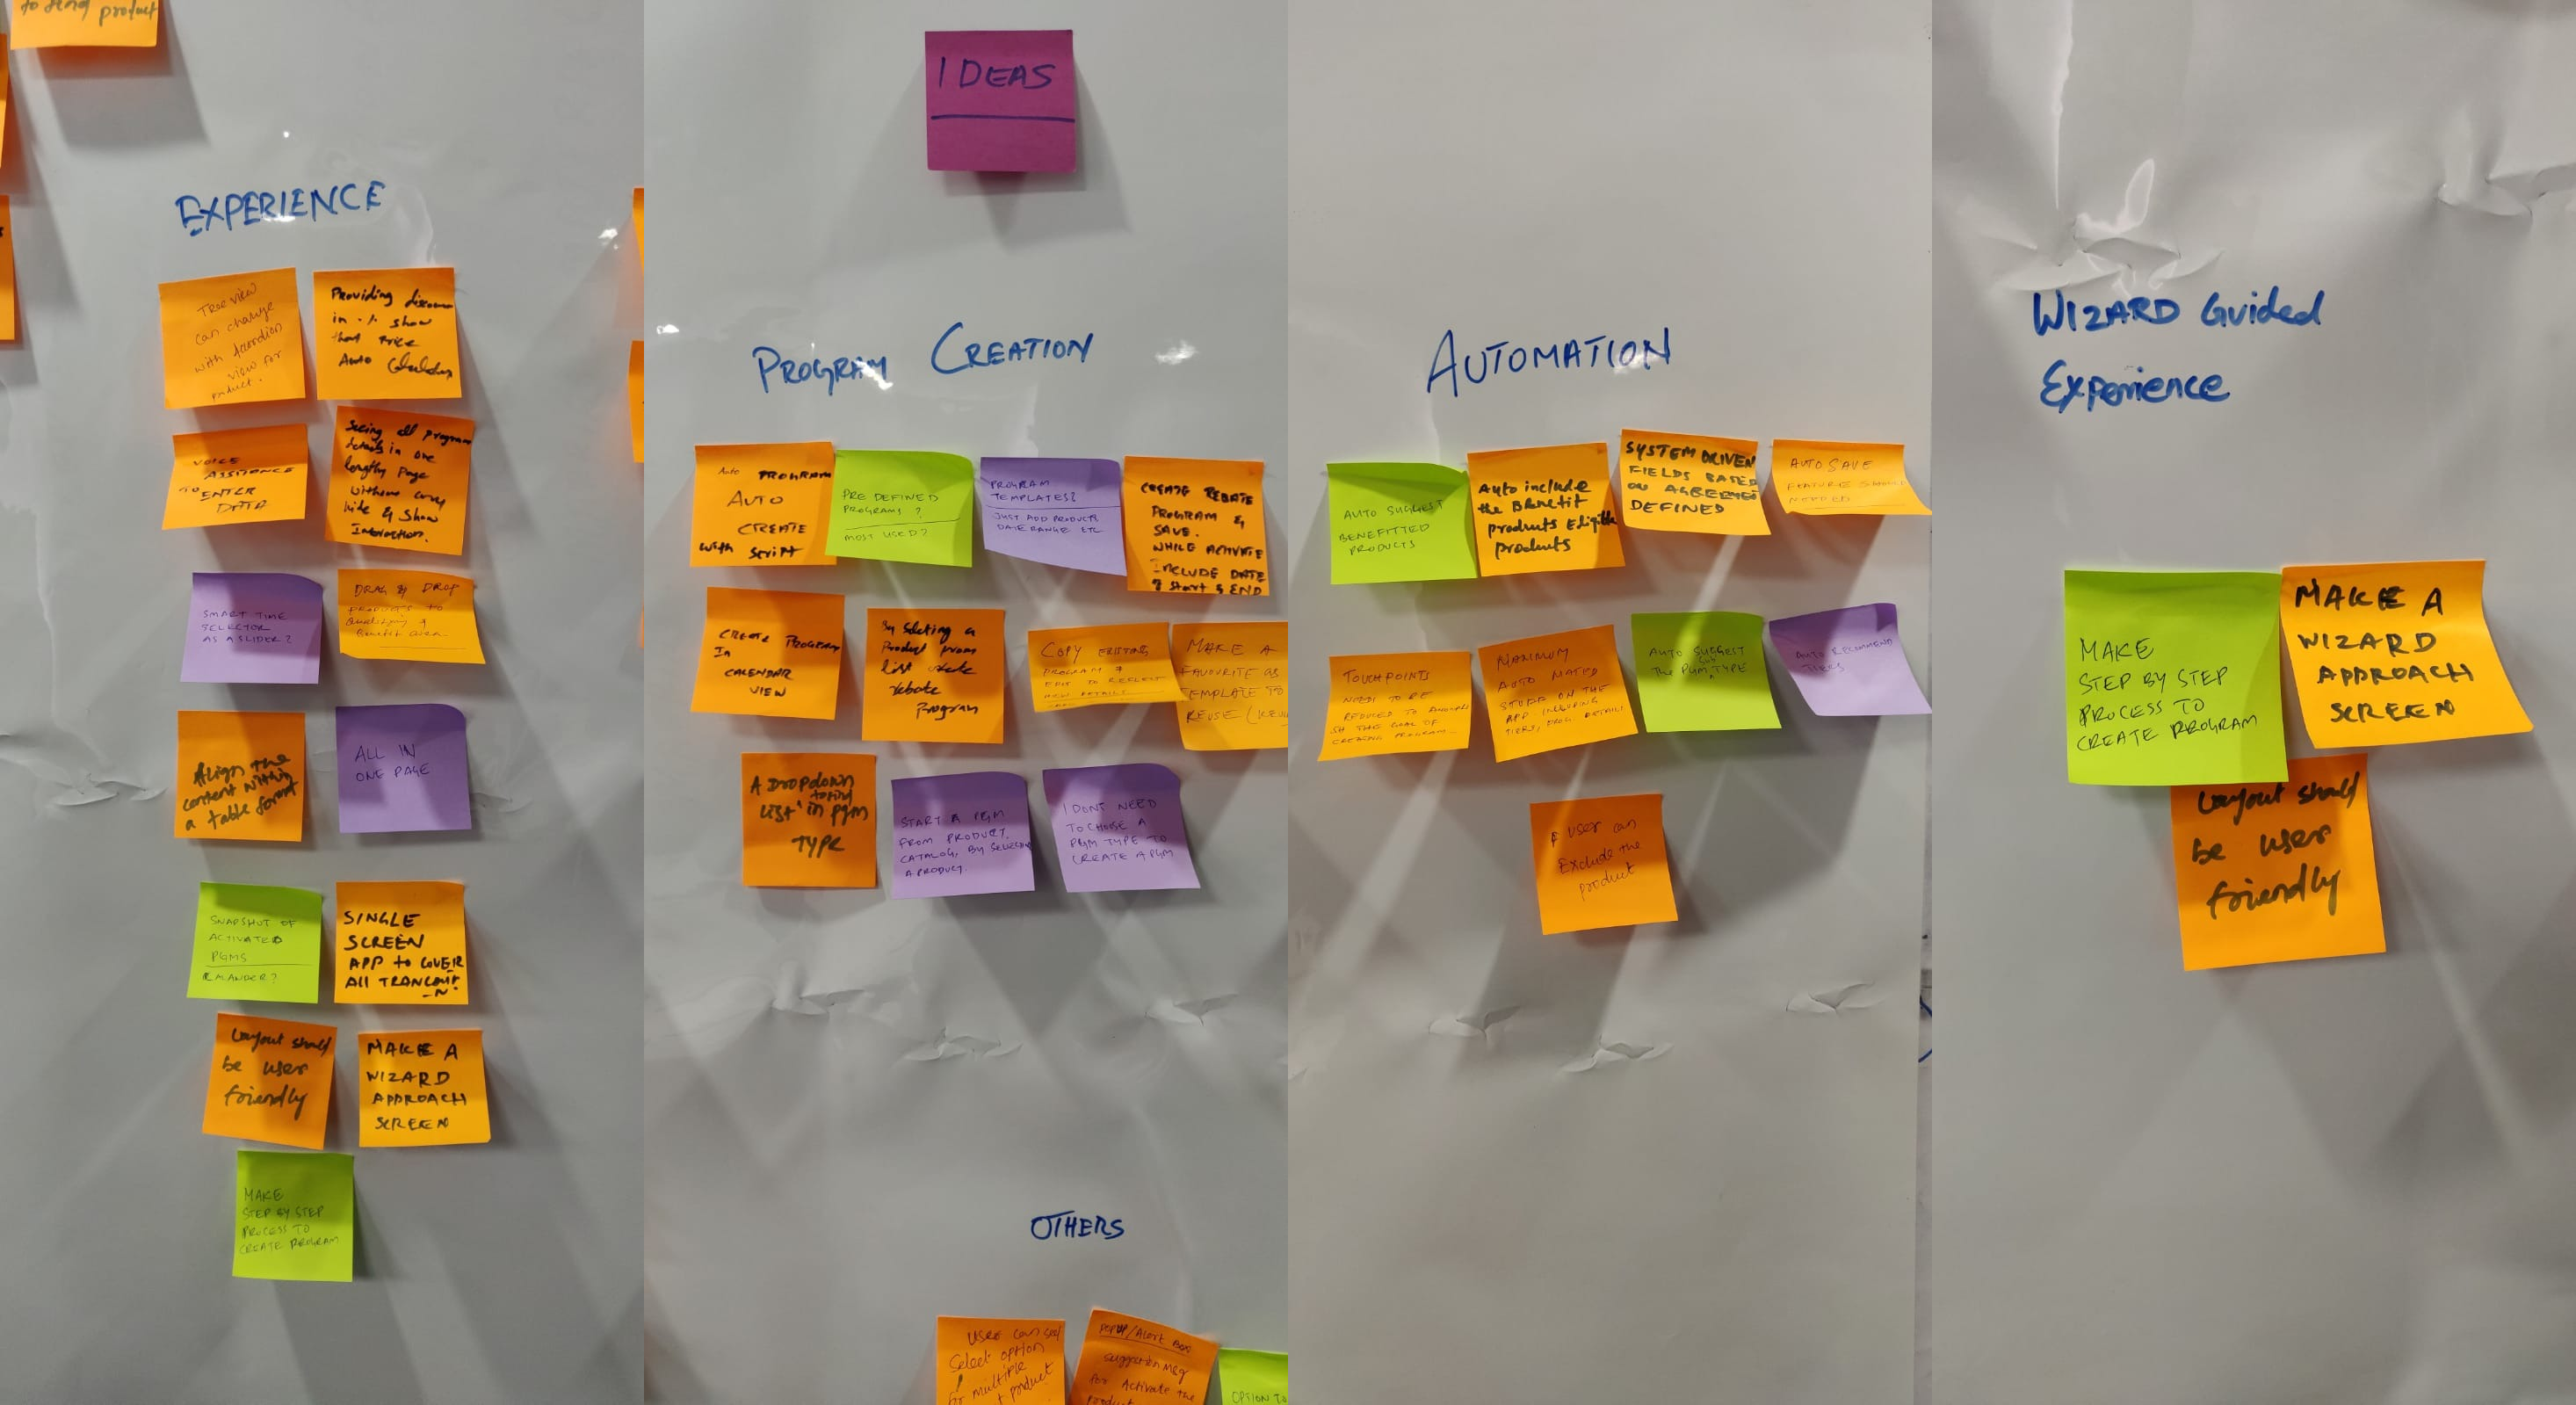 Whiteboard with the same post-its reorganized by topical areas, better known as an Affinity Map.